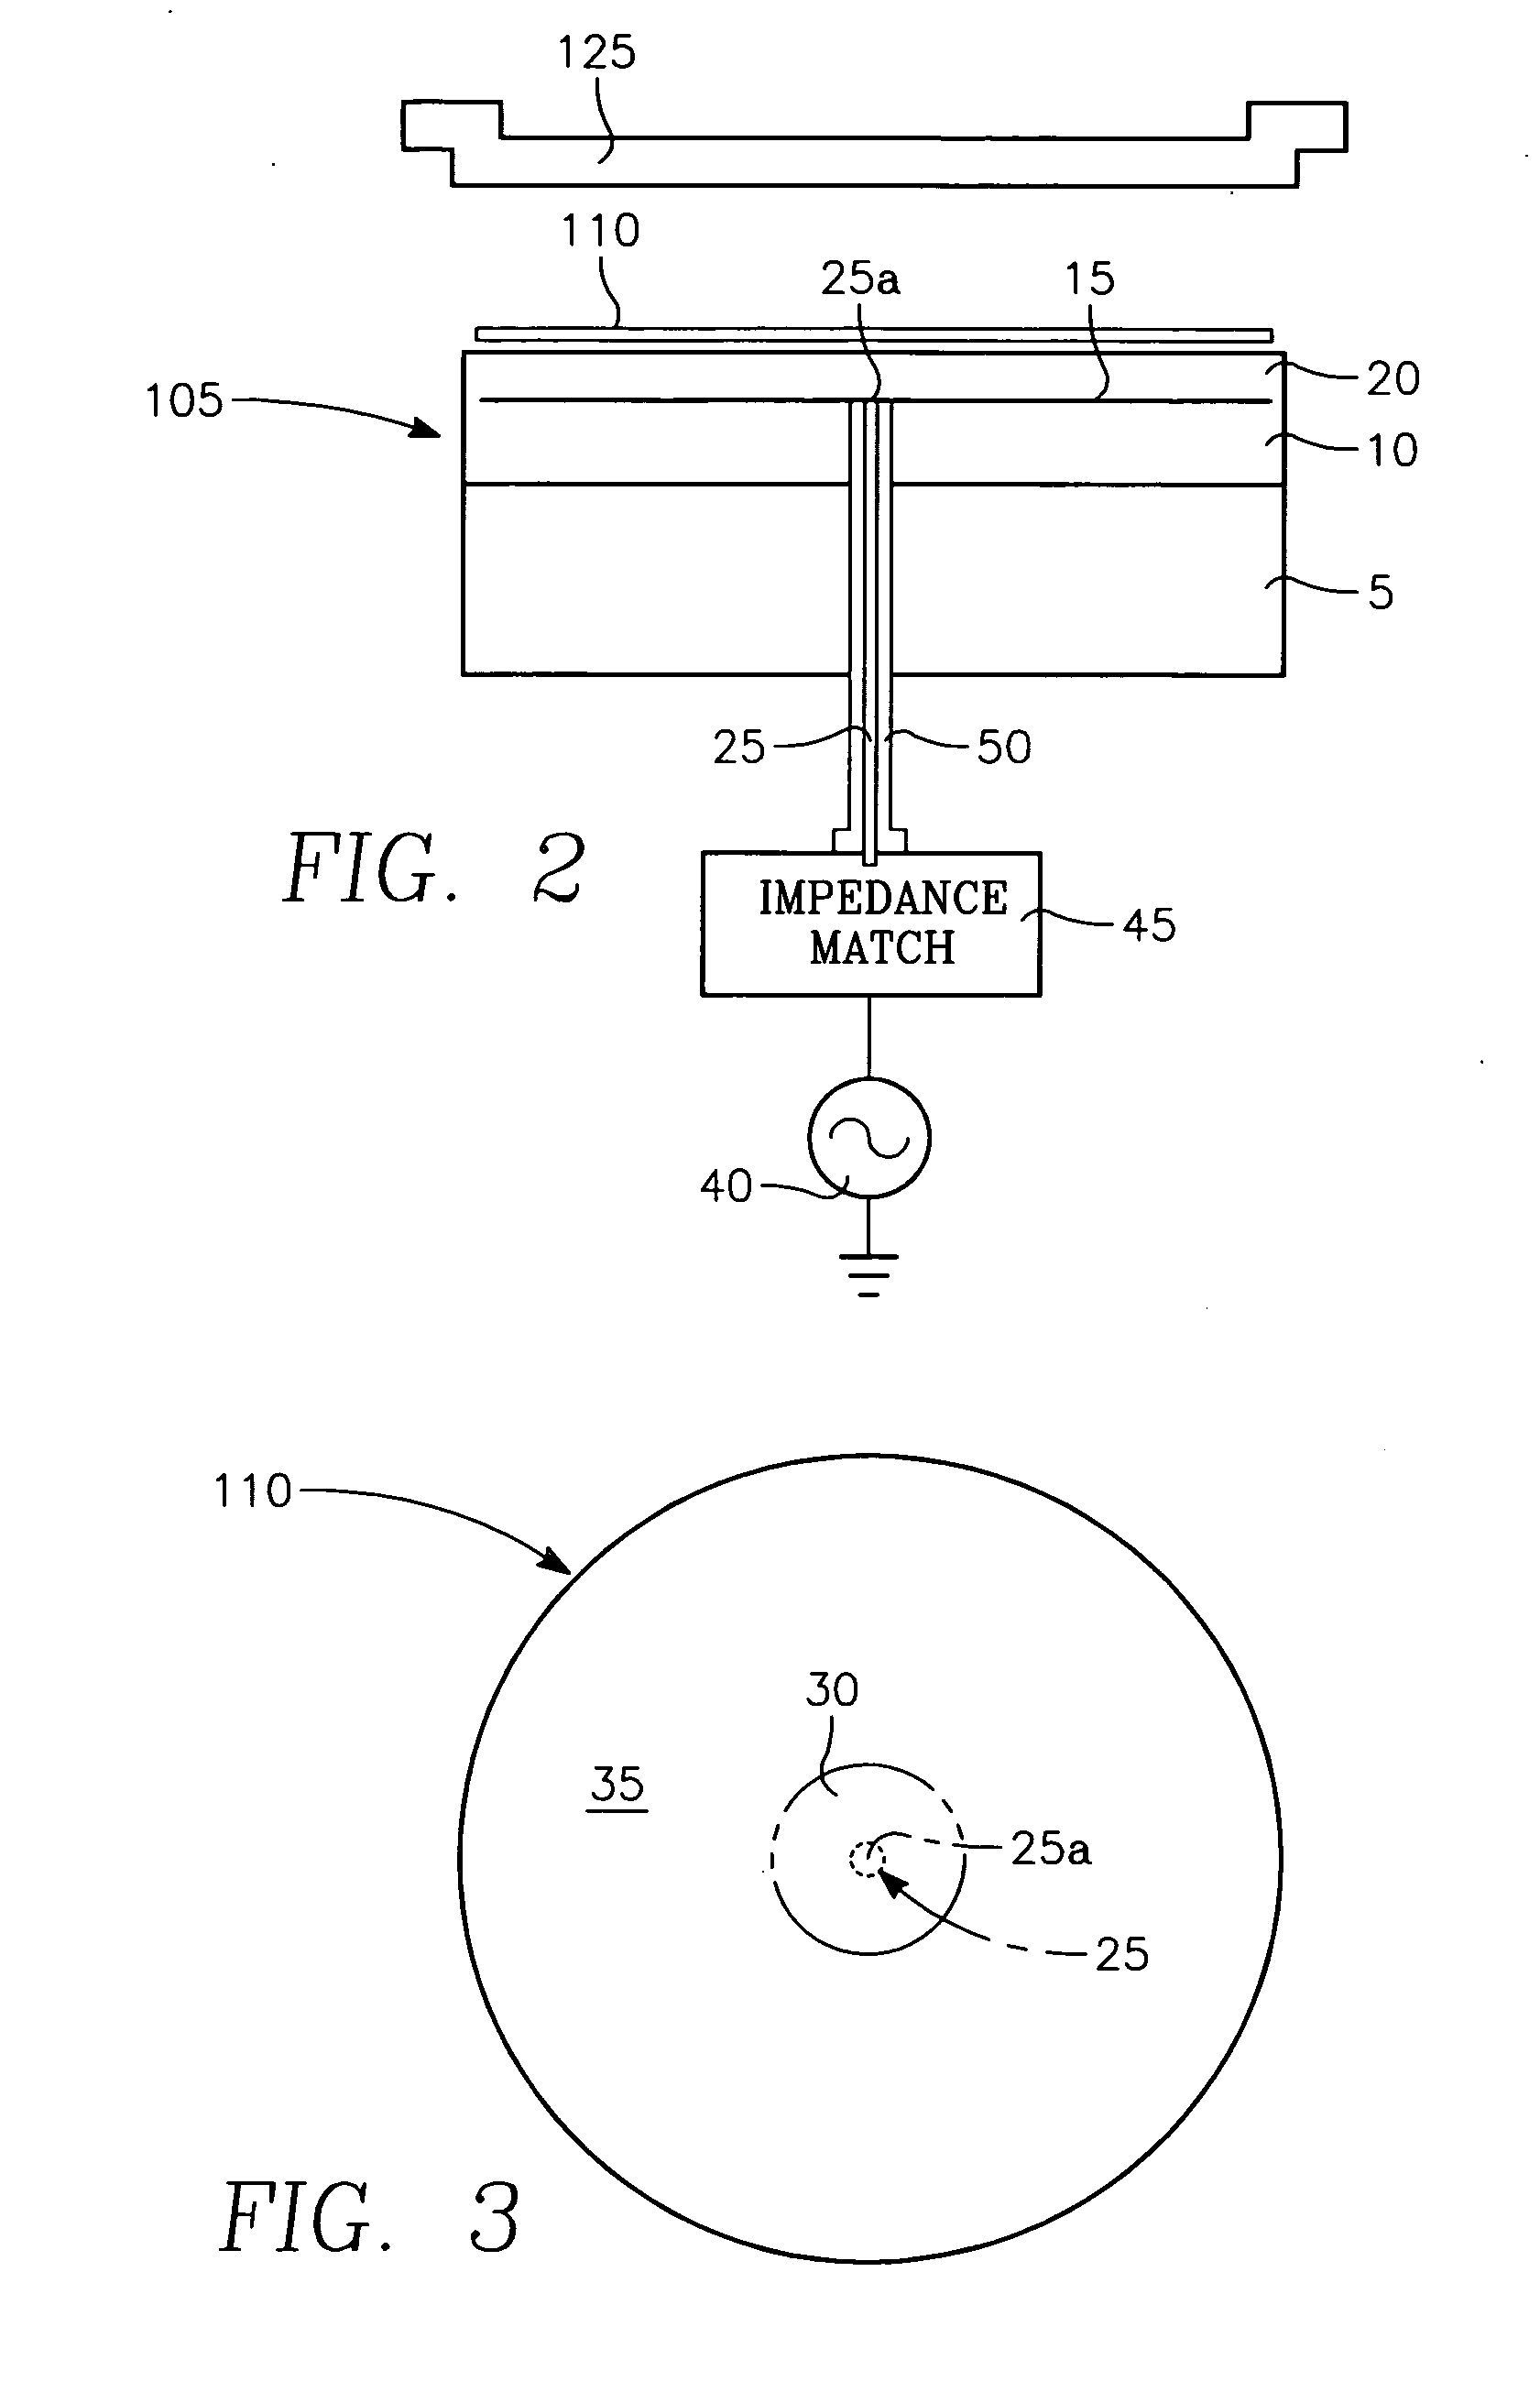 Method of operating a capacitively coupled plasma reactor with dual temperature control loops